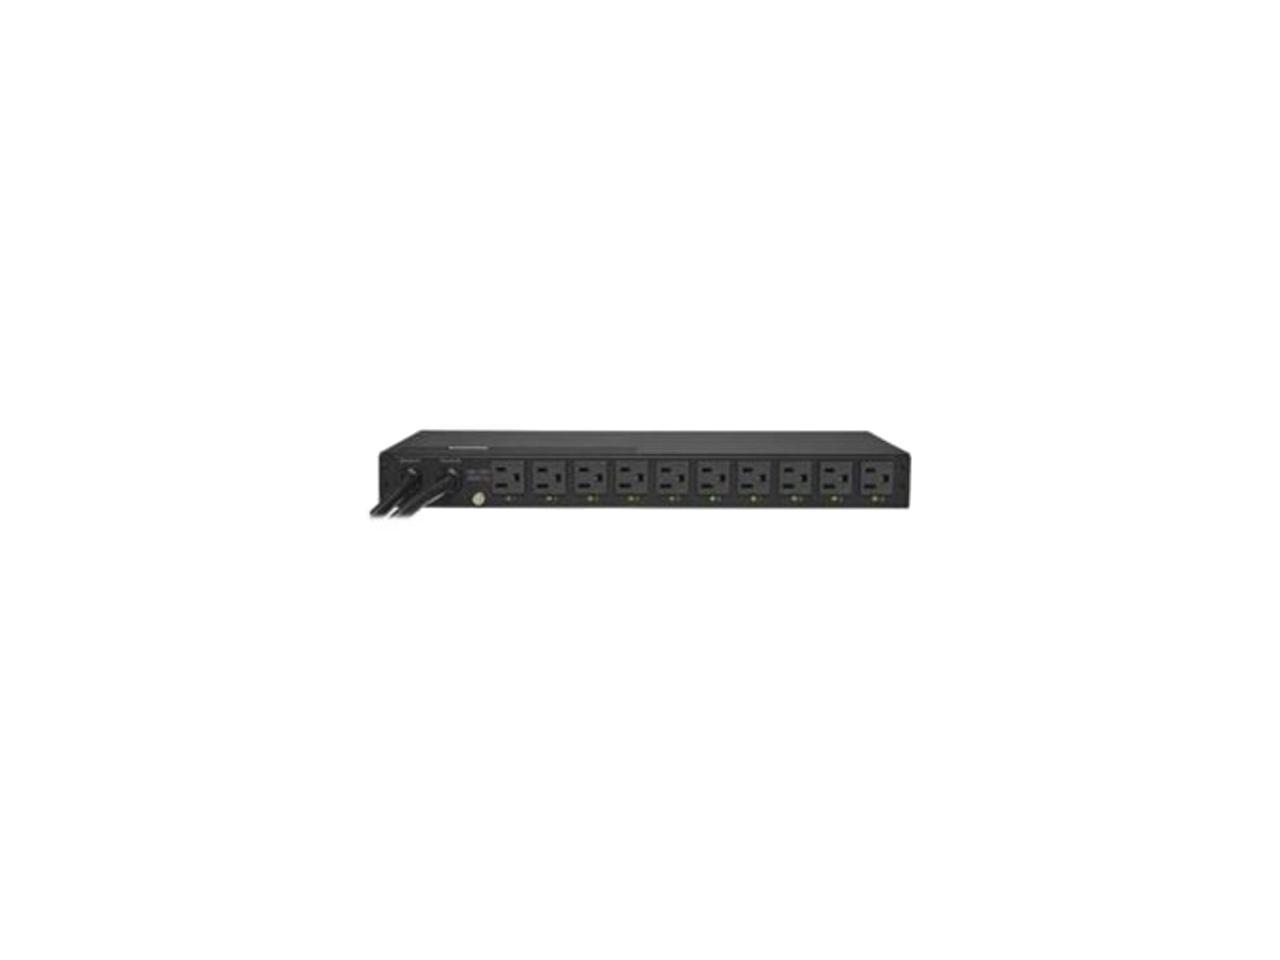 CyberPower PDU15SW10ATNET Switched ATS PDU 120V 15A 1U 10-Outlets (2) 5-15P